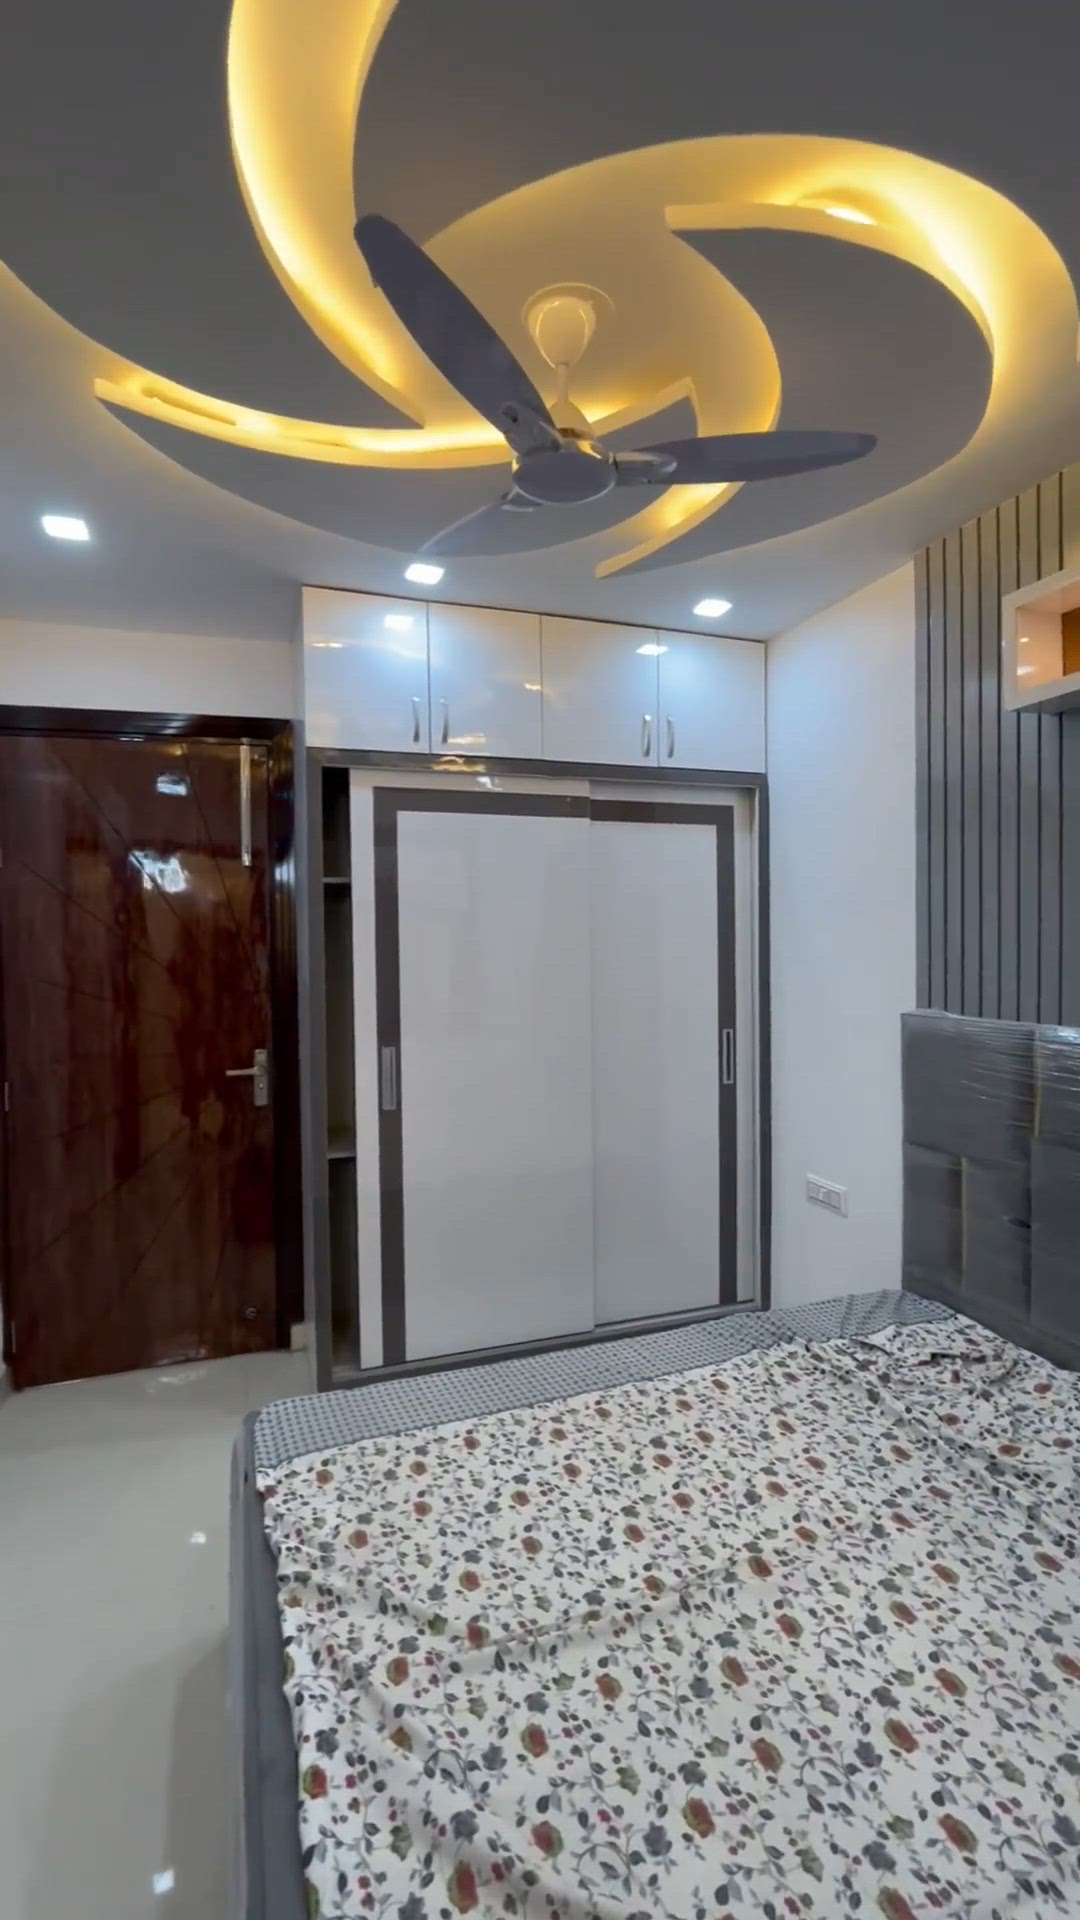 Looking for one-stop interior design solutions for your dream home or office? 😍

At Pine And Pillars, we don't just build homes but craft your desires into fresh designs to make you fall in love with your home! ✨
Get your dream home designed by us 💫furniture
📩 Comment or DM ' smart ' to order
📞Contact - +91 80958 47005
💻 https://pineandpillars.com/
Follow 👉@pineandpillarofficial
Follow👉 @pineandpillarofficial
Follow👉 @pineandpillarofficial
➖➖➖➖➖➖➖➖   #interiordesign #designinterior #interiordesigner #designdeinteriores #interiordesignideas #interiordesigners #designerdeinteriores #interiordesigns #interiordesigninspiration
.
.
.
#memeindian
#memesociety
#indianjoke
#desitrolls
#idioticsperm
#interiordesign #designinterior #interiordesigner #designdeinteriores #interiordesignideas #interiordesigners #designerdeinteriores #interiordesigns #interiordesigninspiration